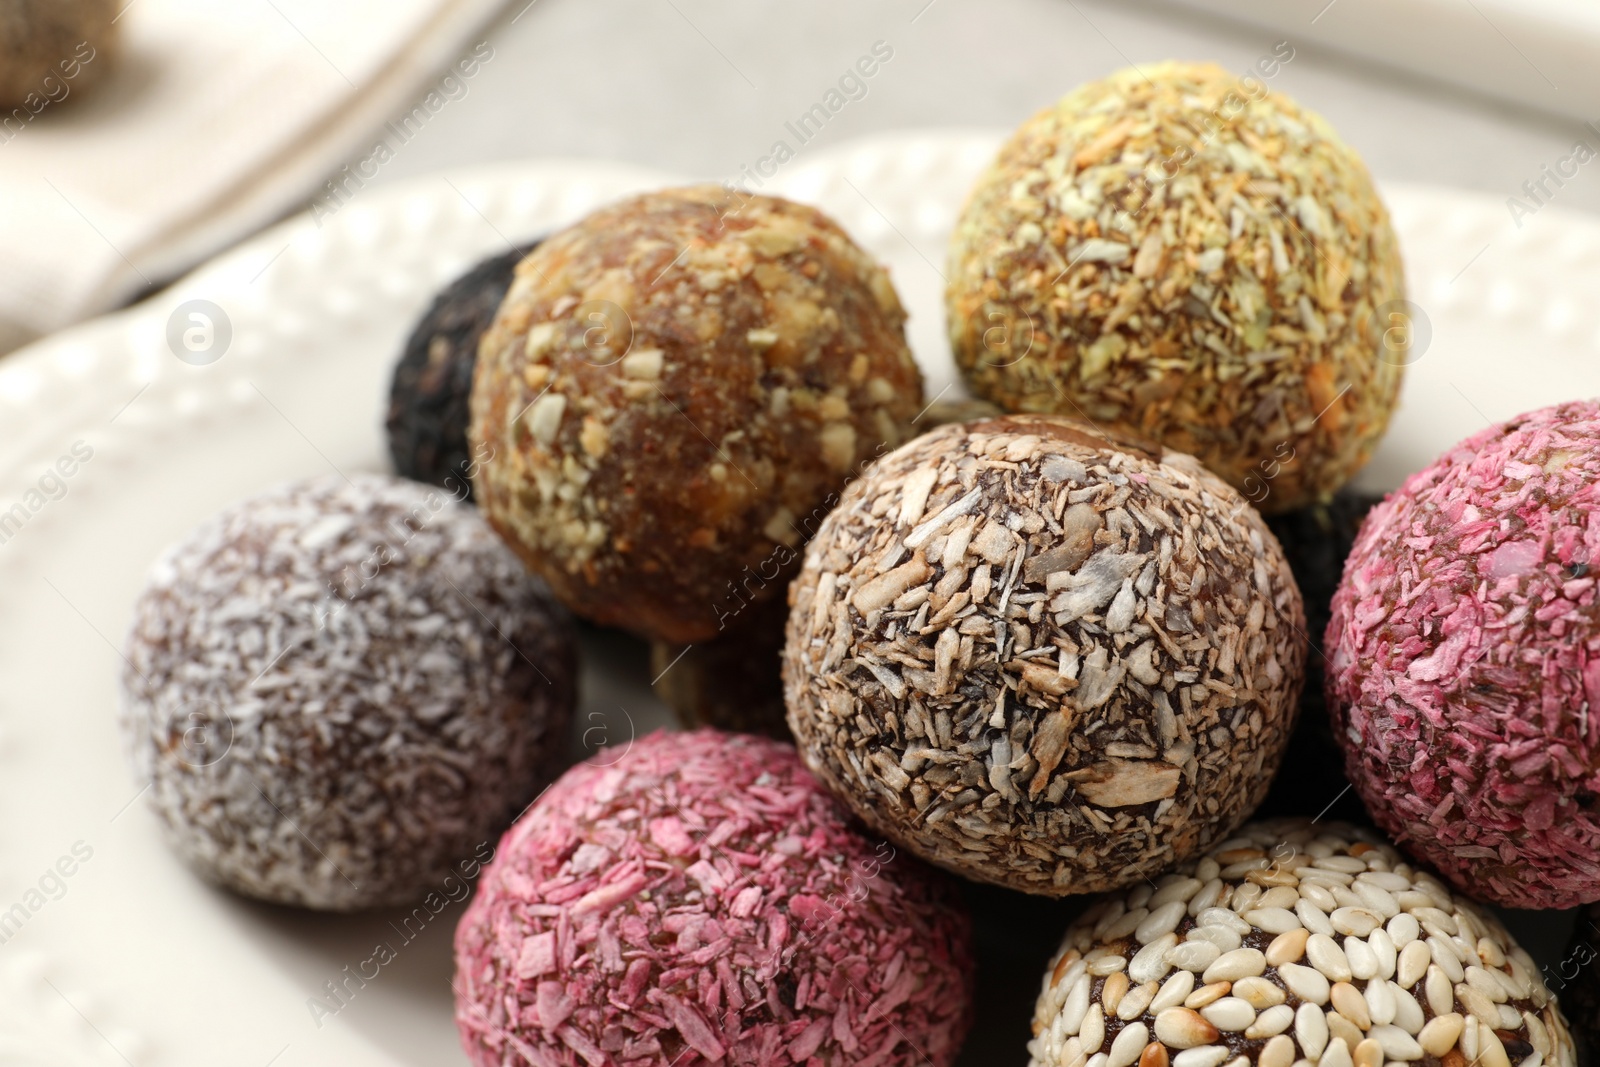 Photo of Different delicious vegan candy balls on plate, closeup